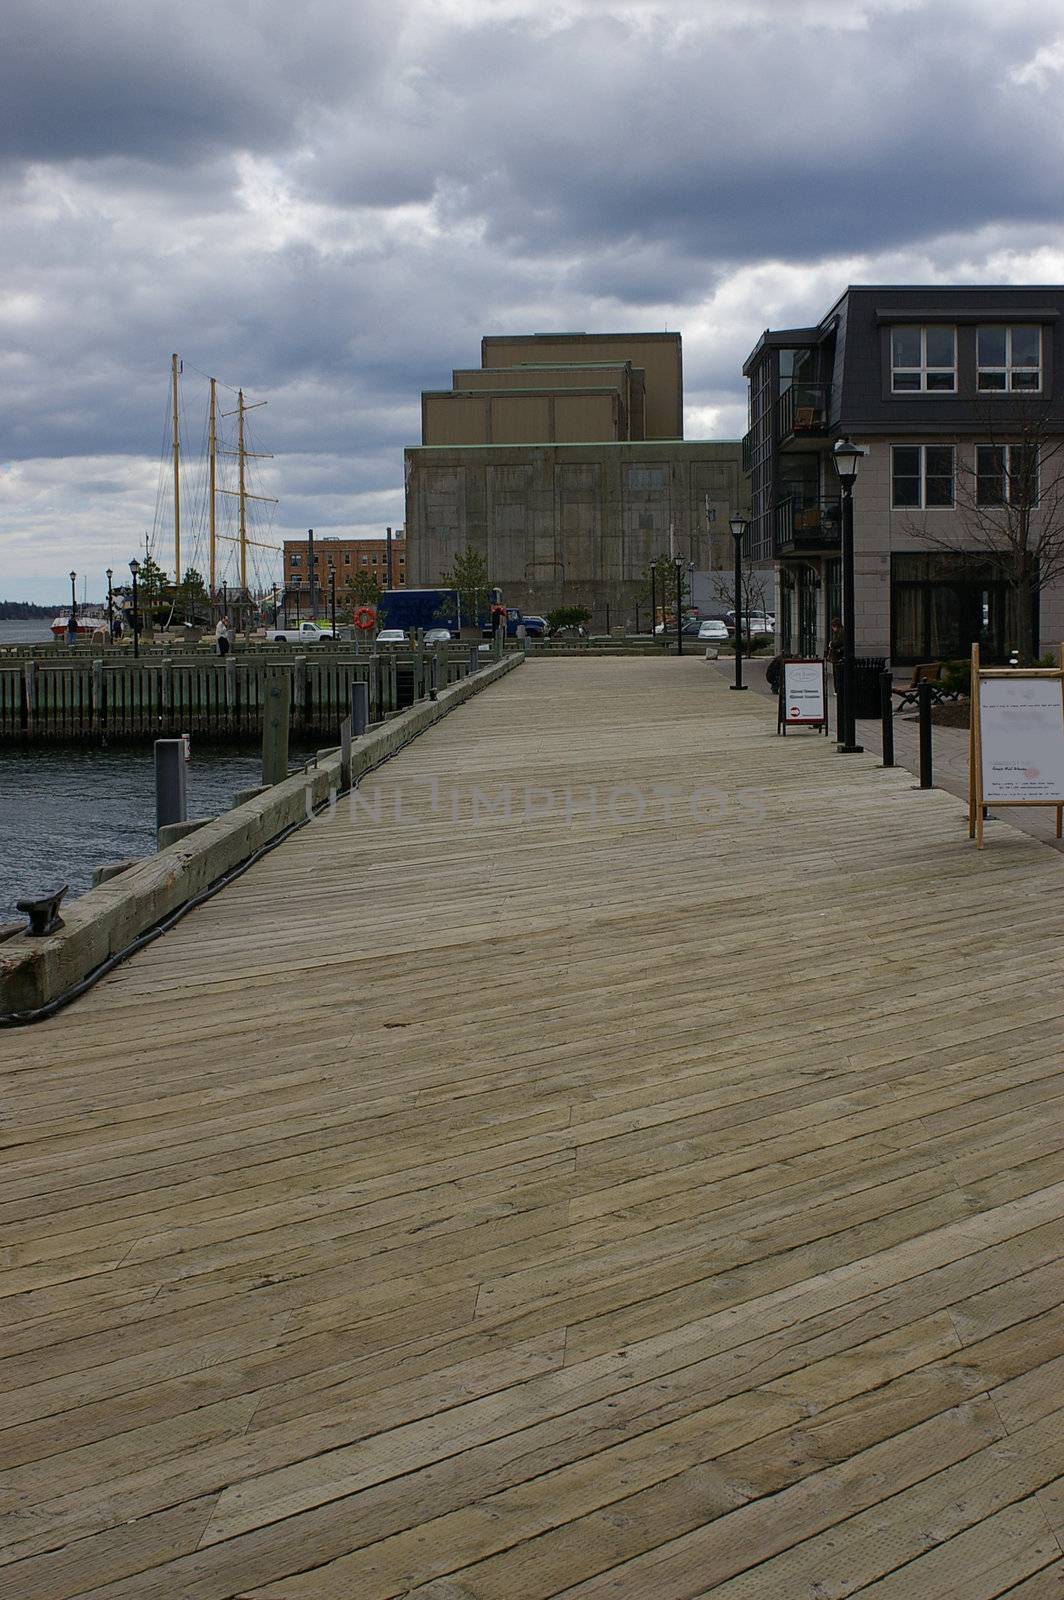 A view down the boardwalk with the water on one side and buildings on the other